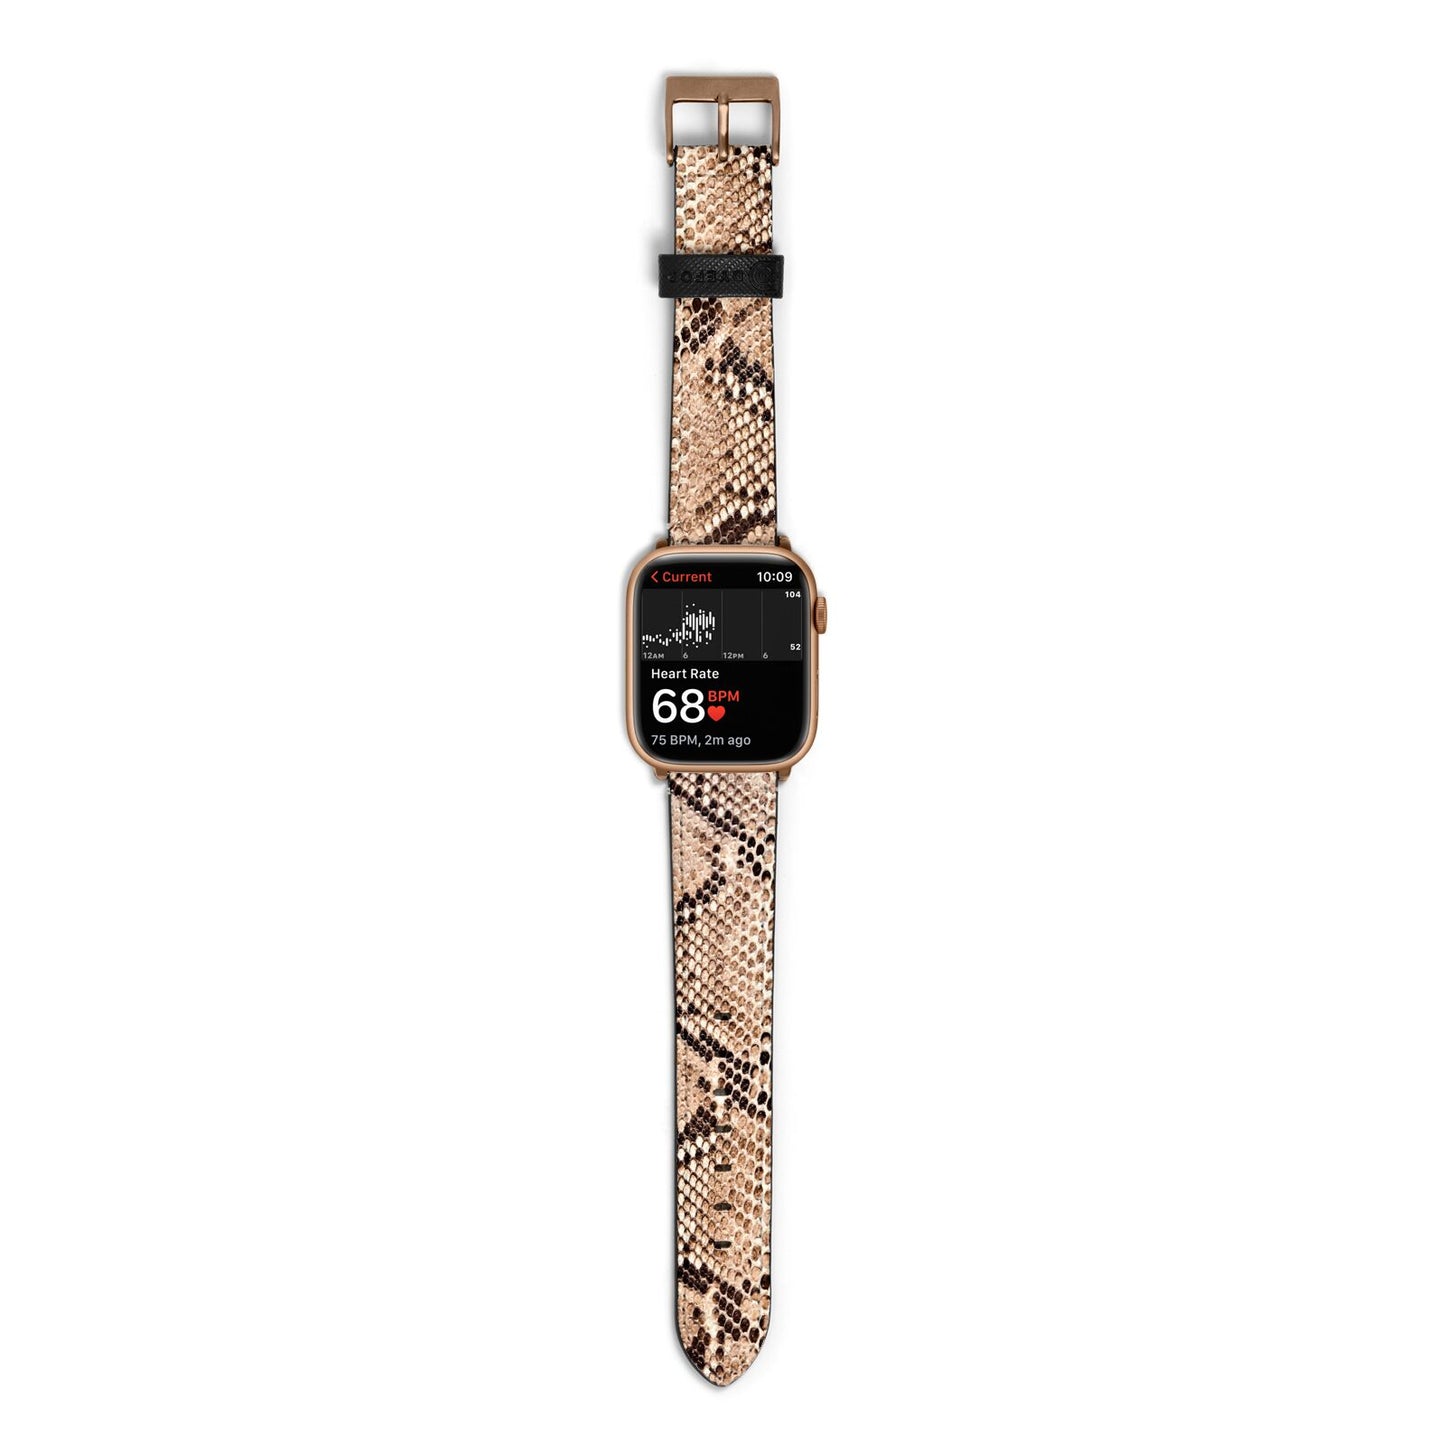 Snakeskin Apple Watch Strap Size 38mm with Gold Hardware